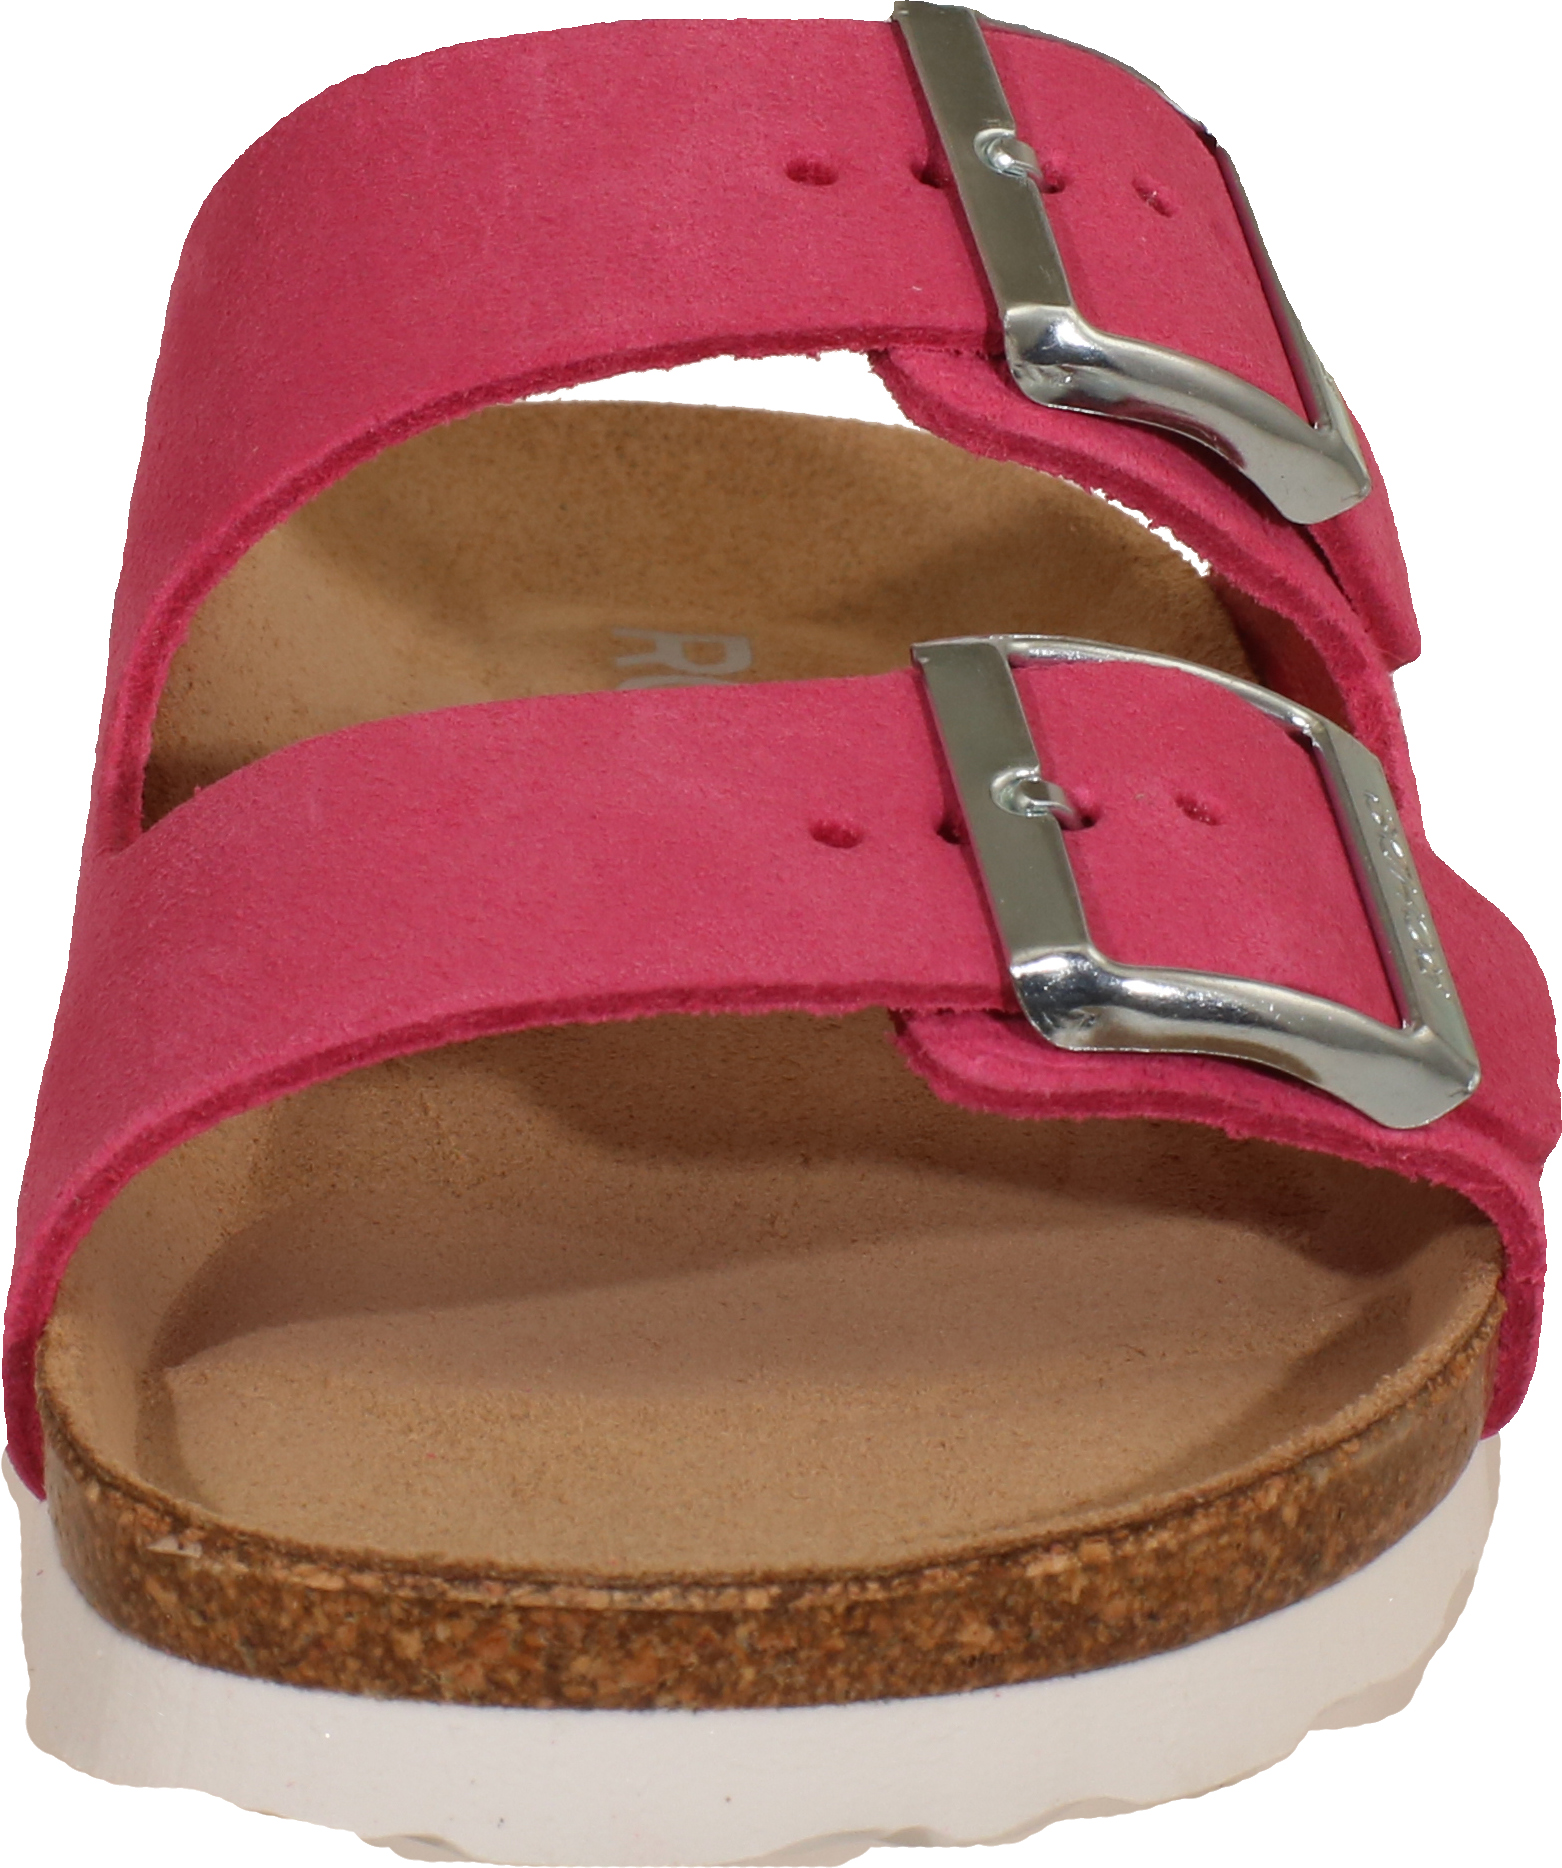 Sunnys N12 - Pink suede leather